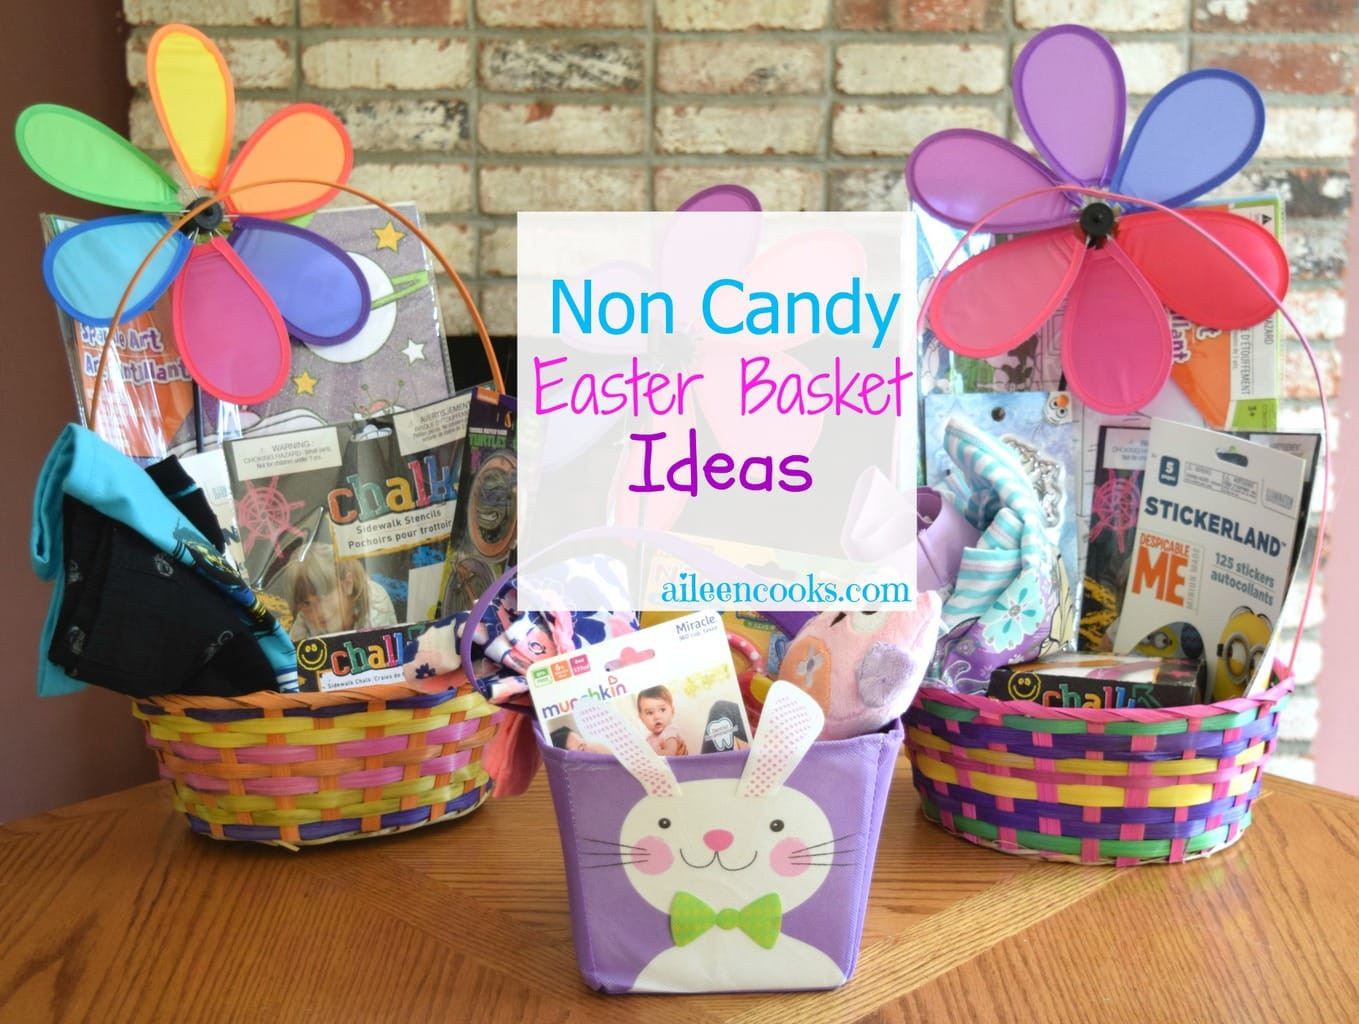 Non Candy Easter Basket Ideas
 Non Candy Easter Basket Ideas Aileen Cooks